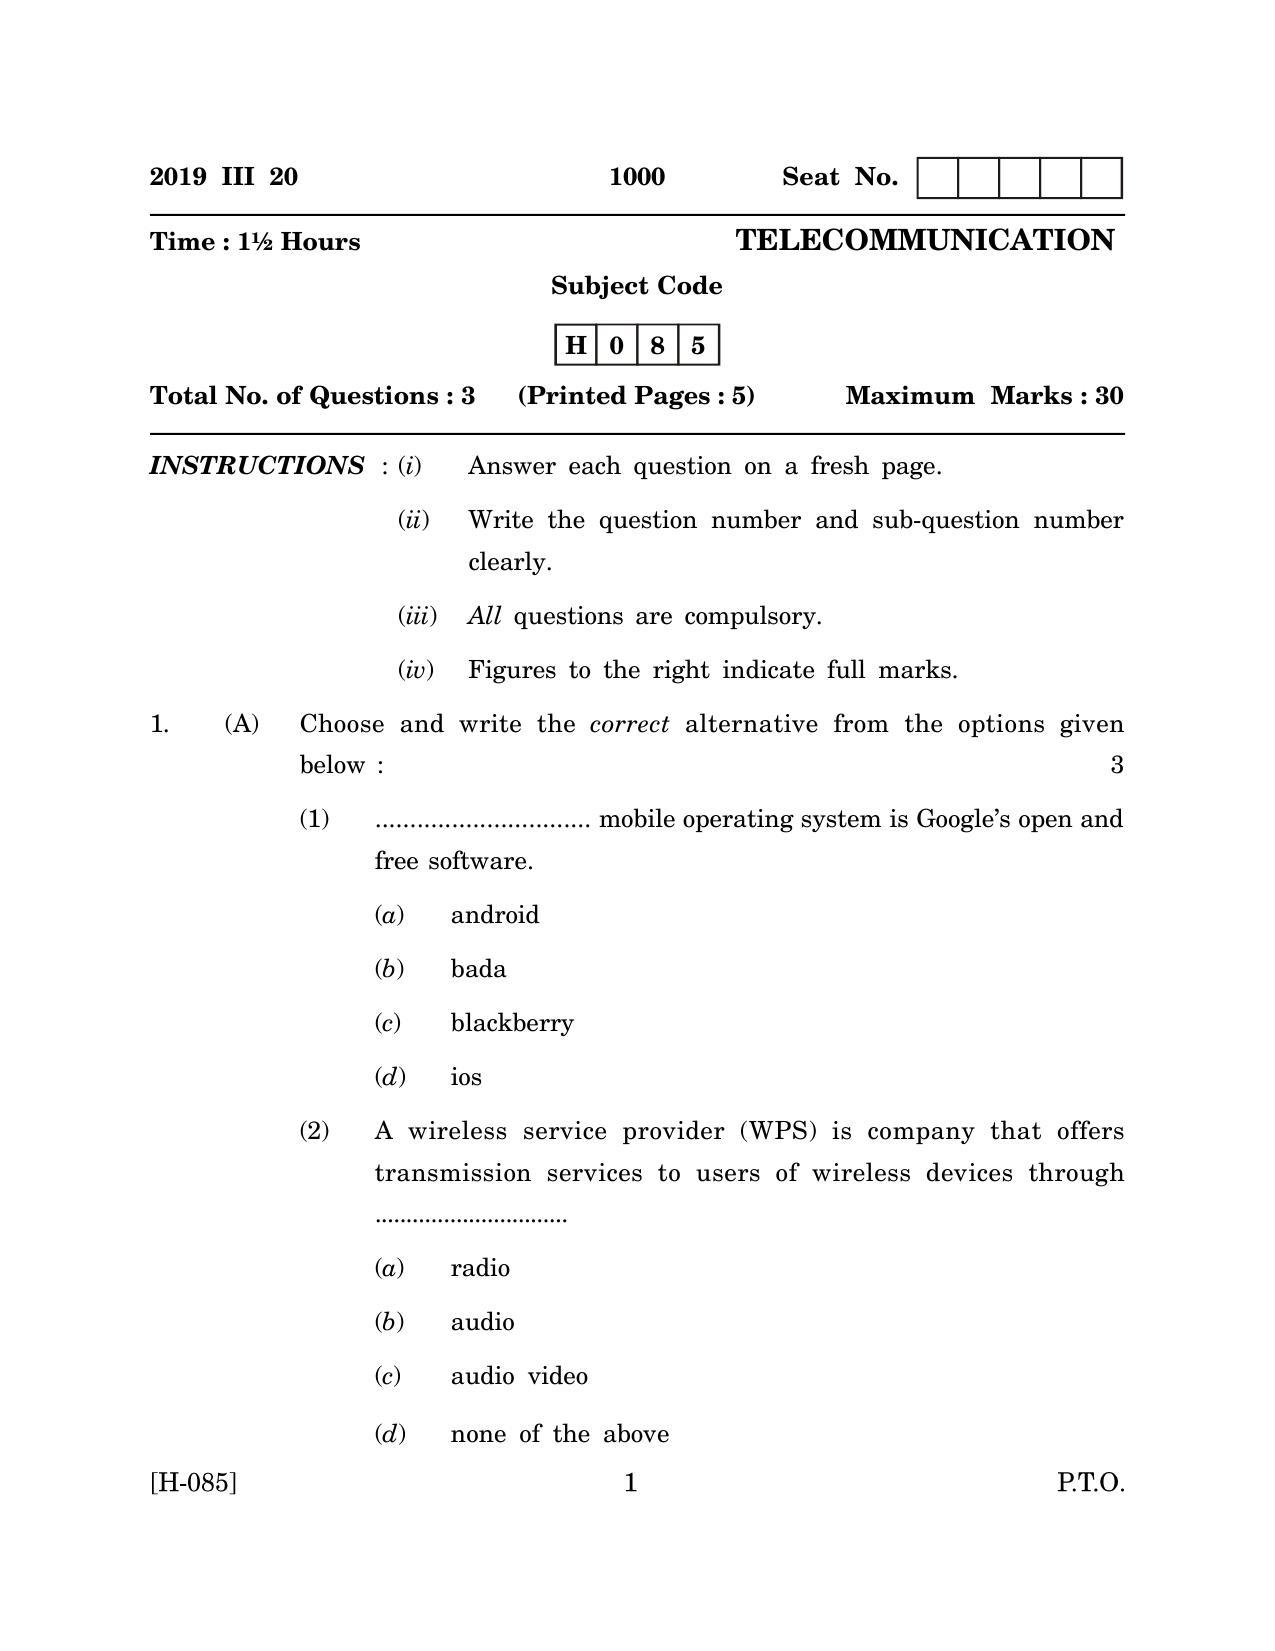 Goa Board Class 12 Telecommunication   (March 2019_0) Question Paper - Page 1